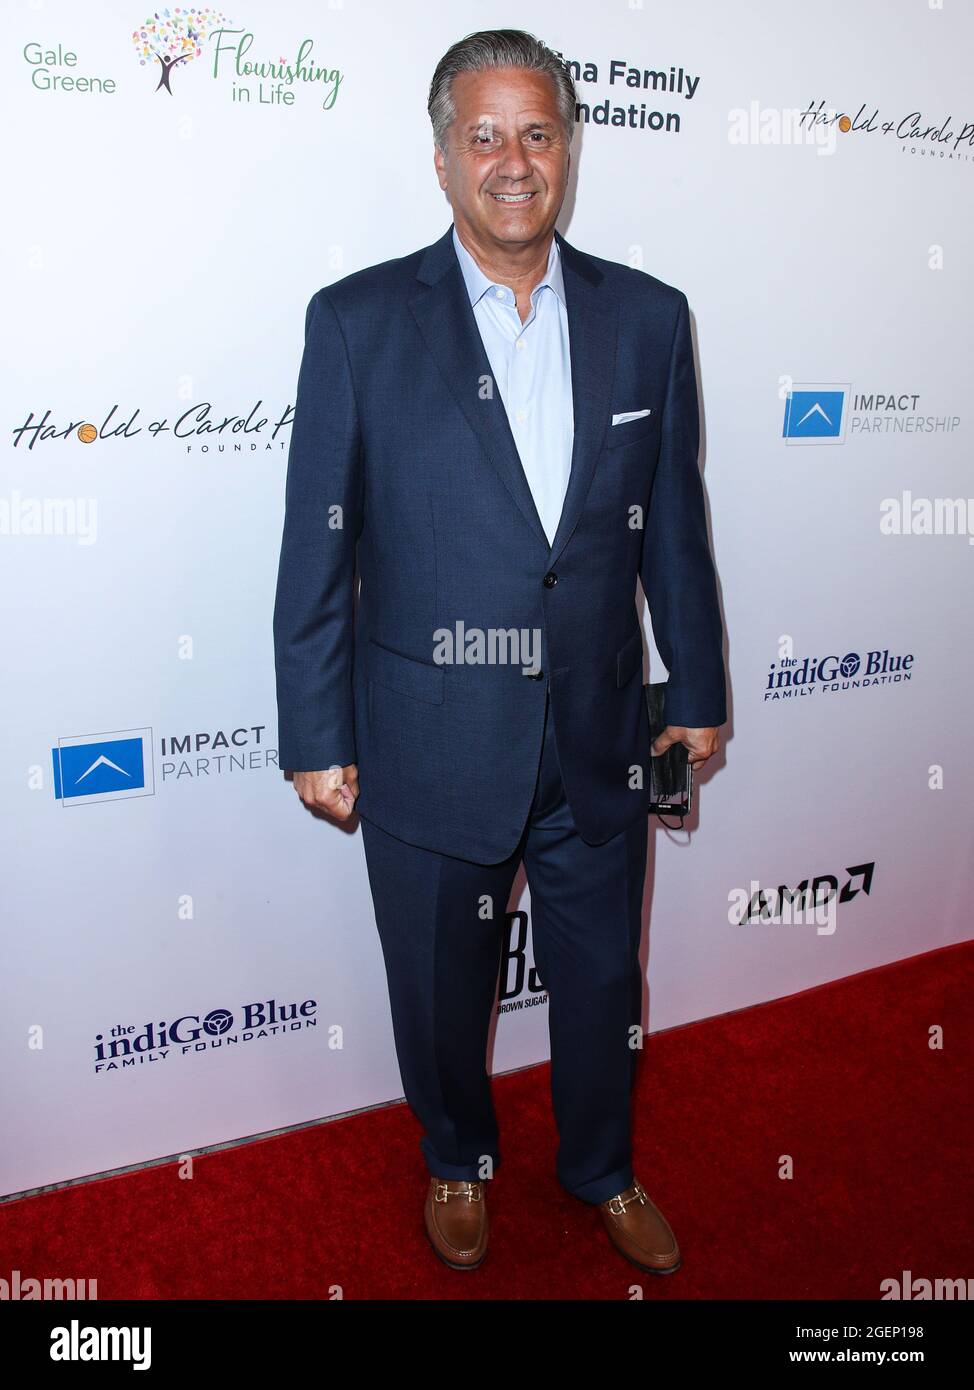 Beverly Hills, USA. 20th Aug, 2021. BEVERLY HILLS, LOS ANGELES, CALIFORNIA, USA - AUGUST 20: American basketball coach John Calipari arrives at the 21st Annual Harold and Carole Pump Foundation Gala held at The Beverly Hilton Hotel on August 20, 2021 in Beverly Hills, Los Angeles, California, USA. (Photo by Xavier Collin/Image Press Agency) Credit: Image Press Agency/Alamy Live News Stock Photo